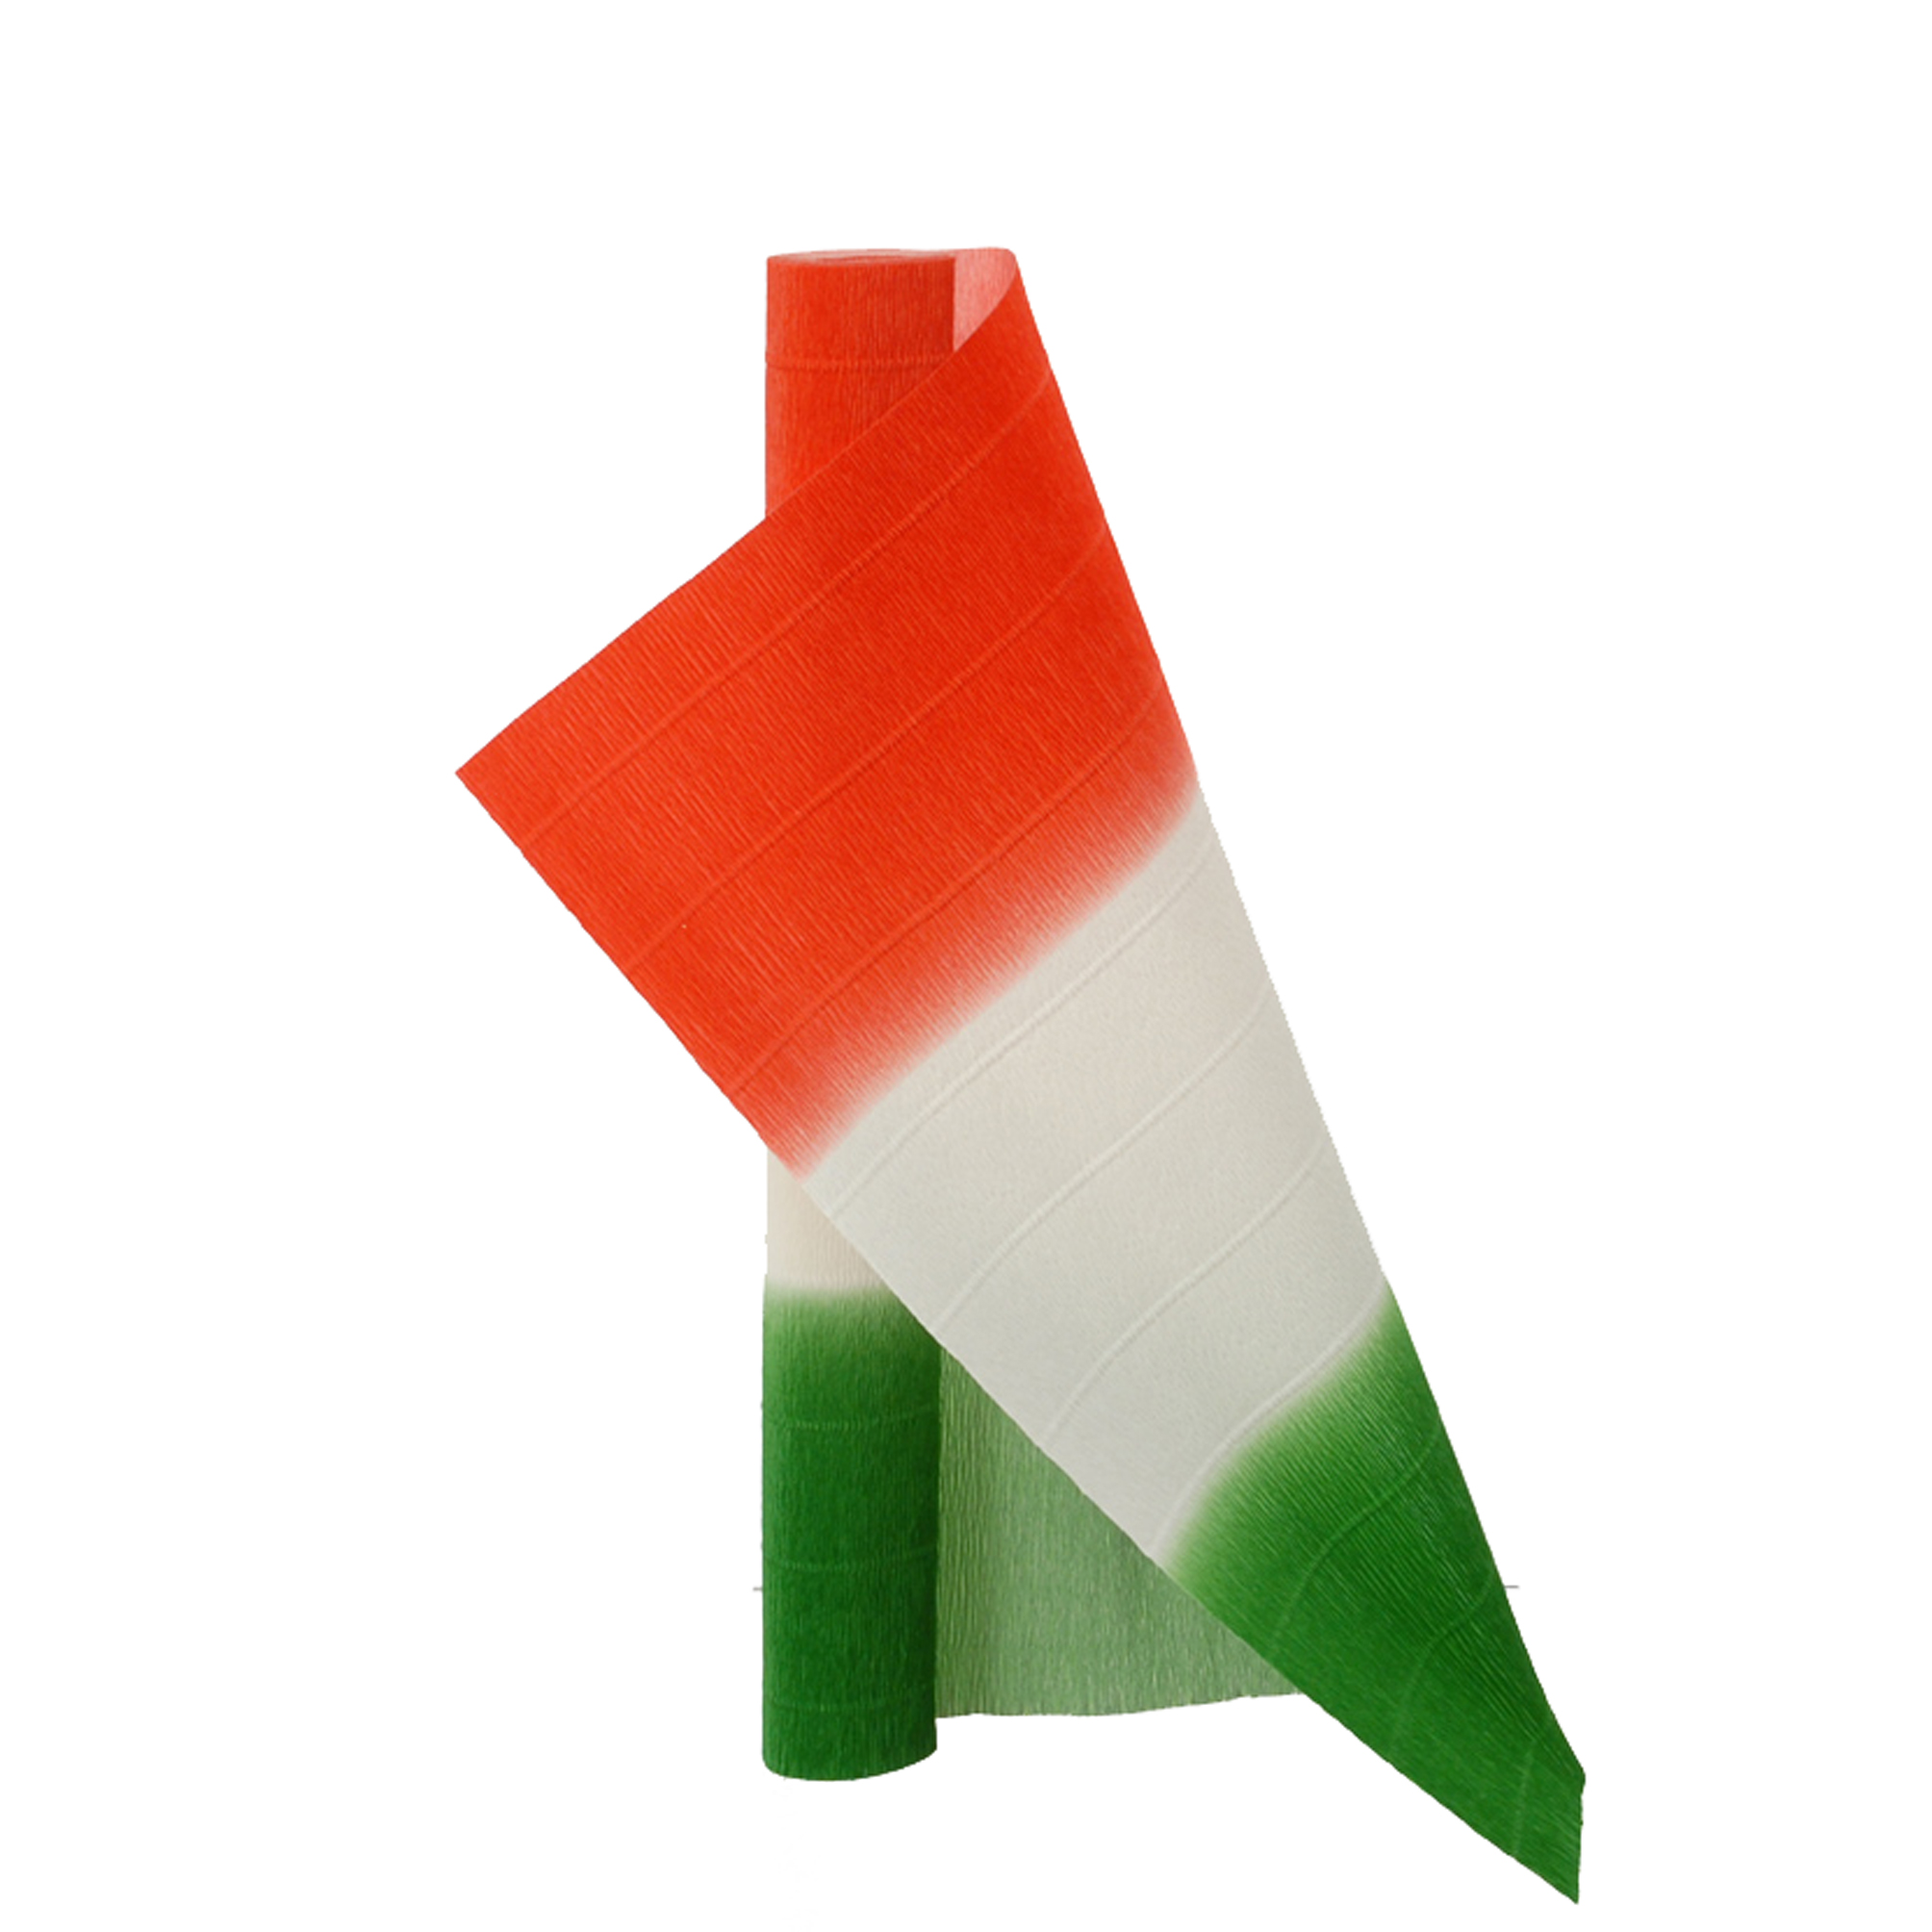 DECORATIONS, COILS CELLOPHANE, PAPER AND FABRIC FOR WRAPPING, CRESPA TRICOLORE 50X250 CM